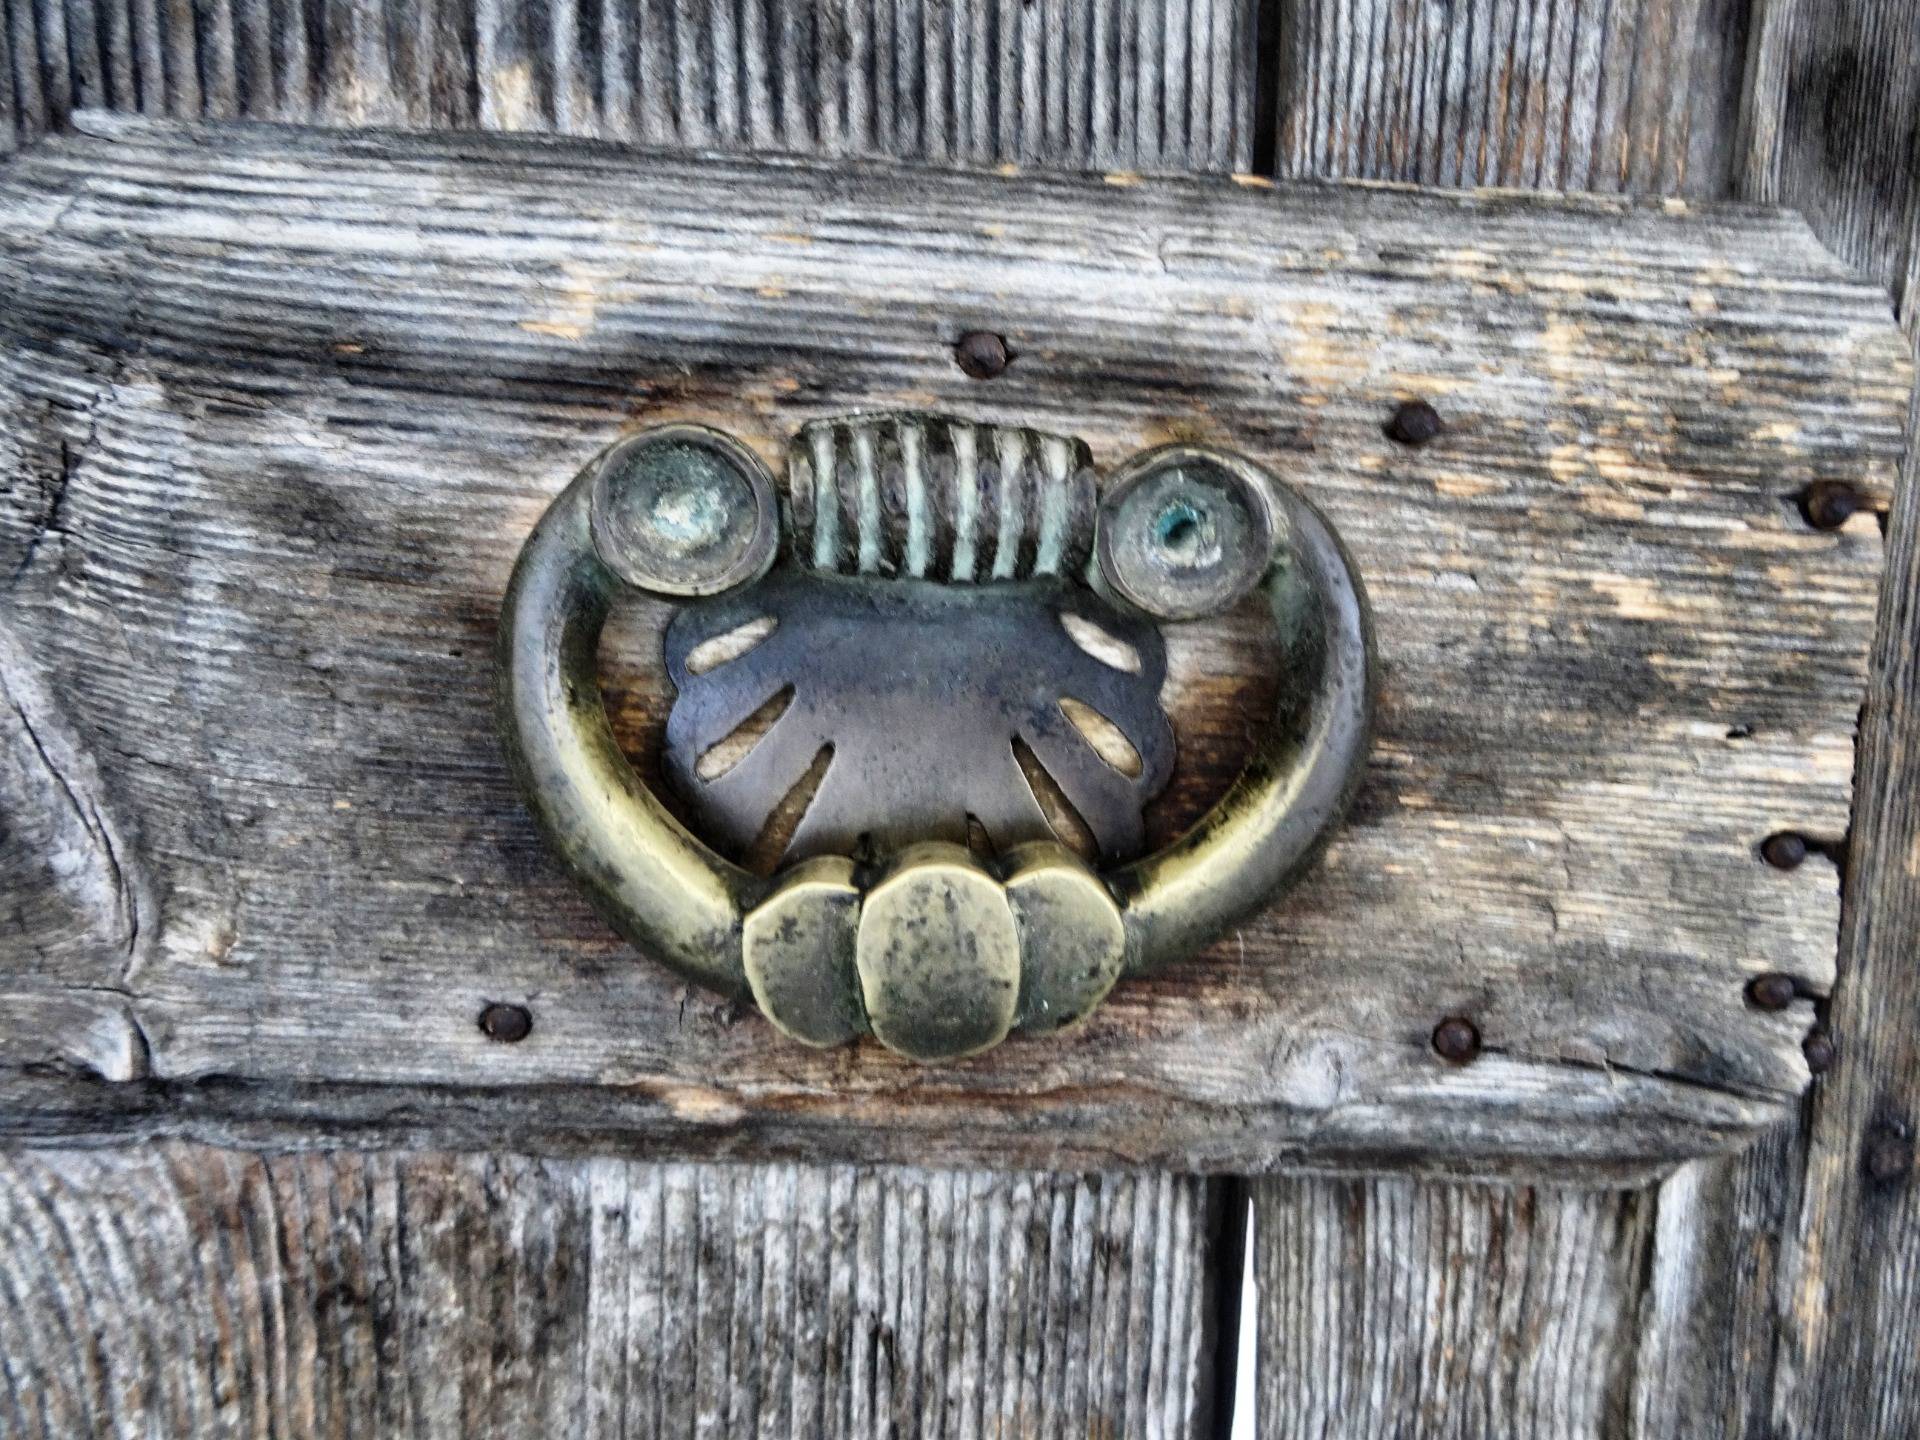 A door bell, old style